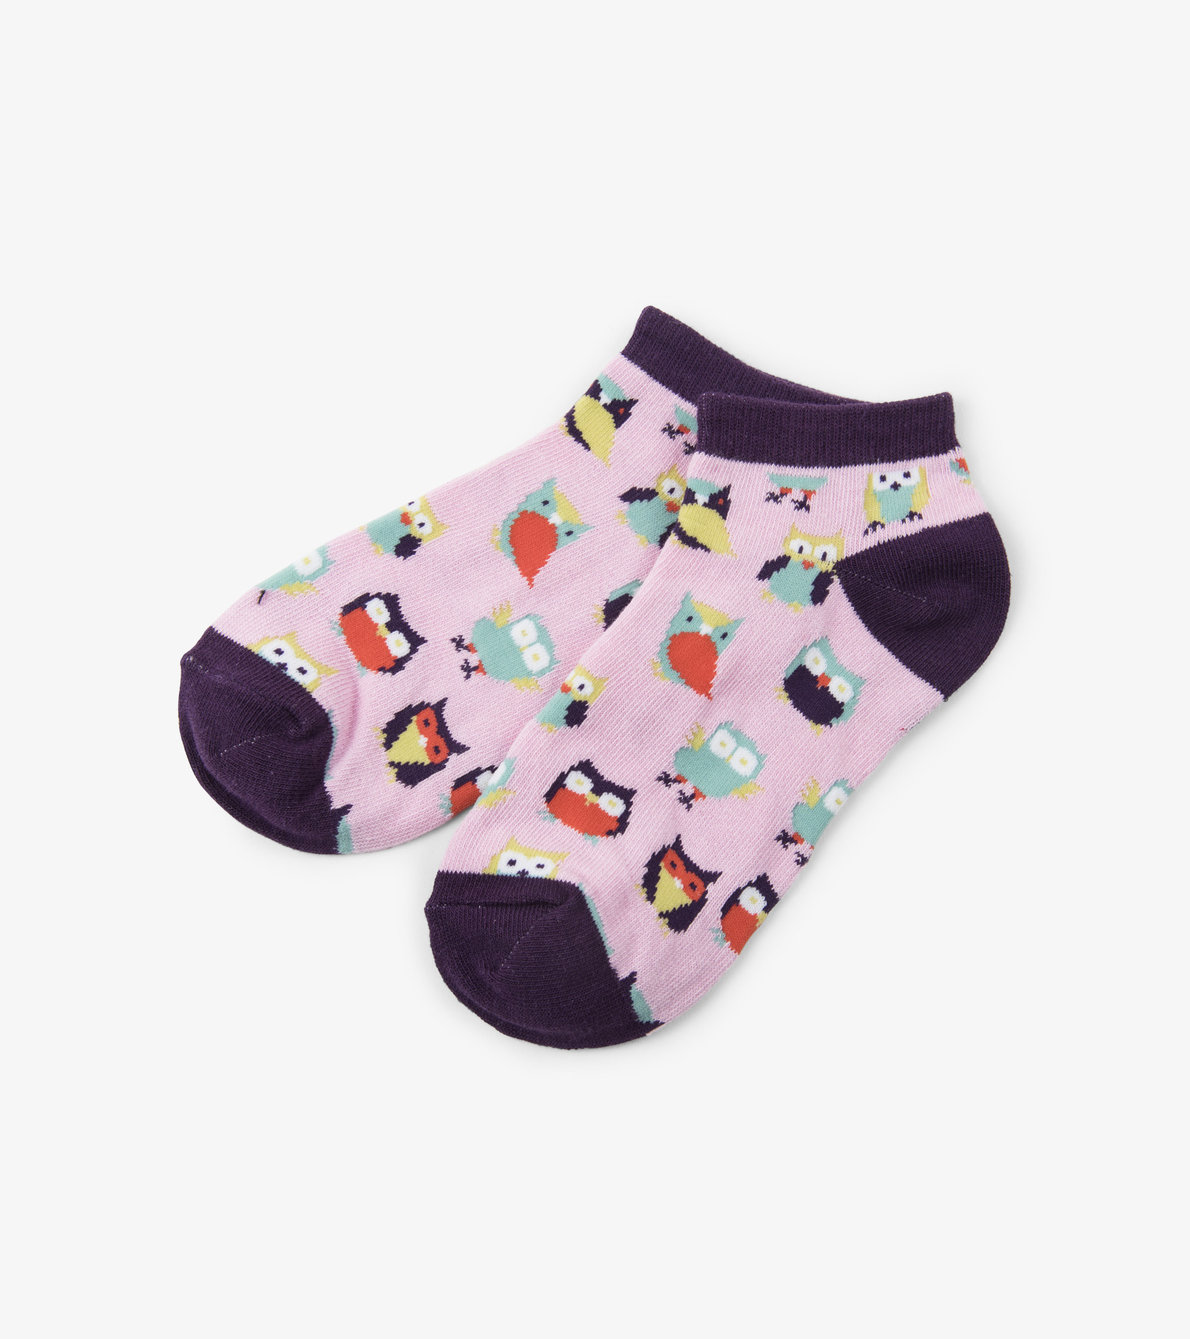 View larger image of Party Owls Women's Ankle Socks